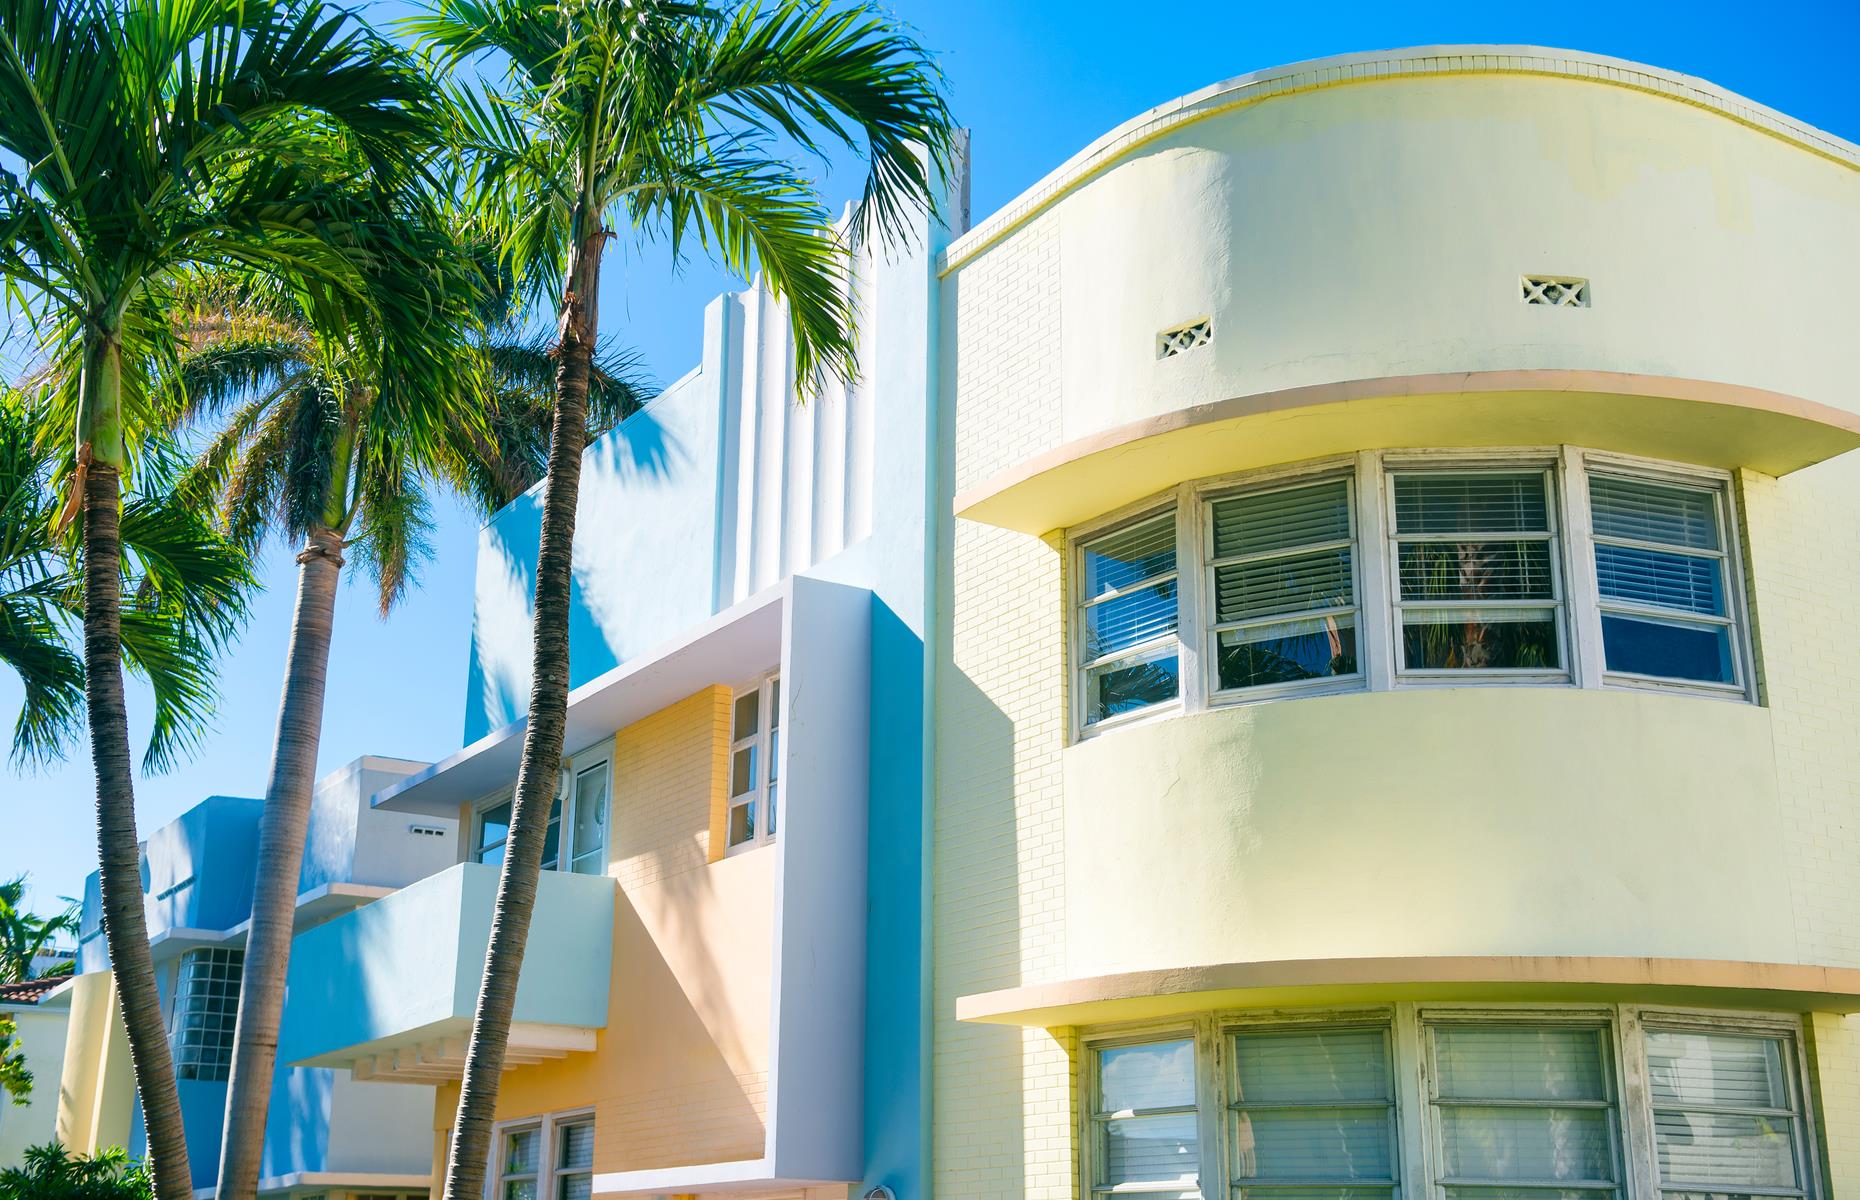 <p>Cornflower skies, palm trees, sandy beaches and rows of 1930s buildings in soft pastel shades. Miami’s South Beach is pretty much the dream seaside destination and a must for architecture enthusiasts. Take a guided tour to learn more about the <a href="https://www.miamiandbeaches.com/things-to-do/history-and-heritage/art-deco-historic-district">Art Deco Historic District</a> or simply stroll along the boulevard and take in the views.</p>